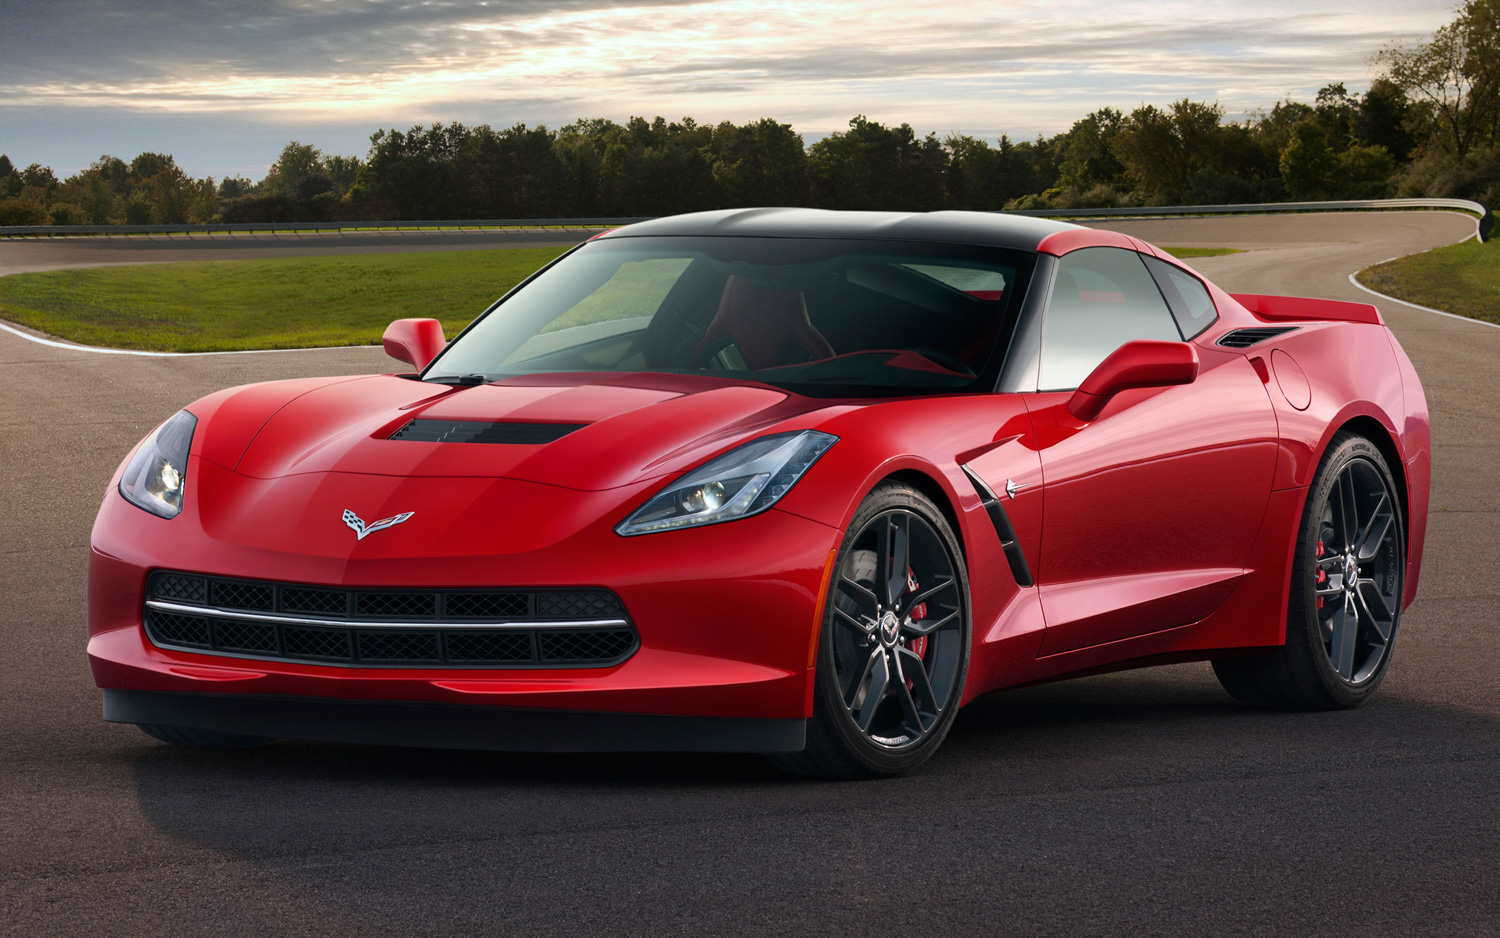 2014 Chevrolet Corvette Stingray front side view in red